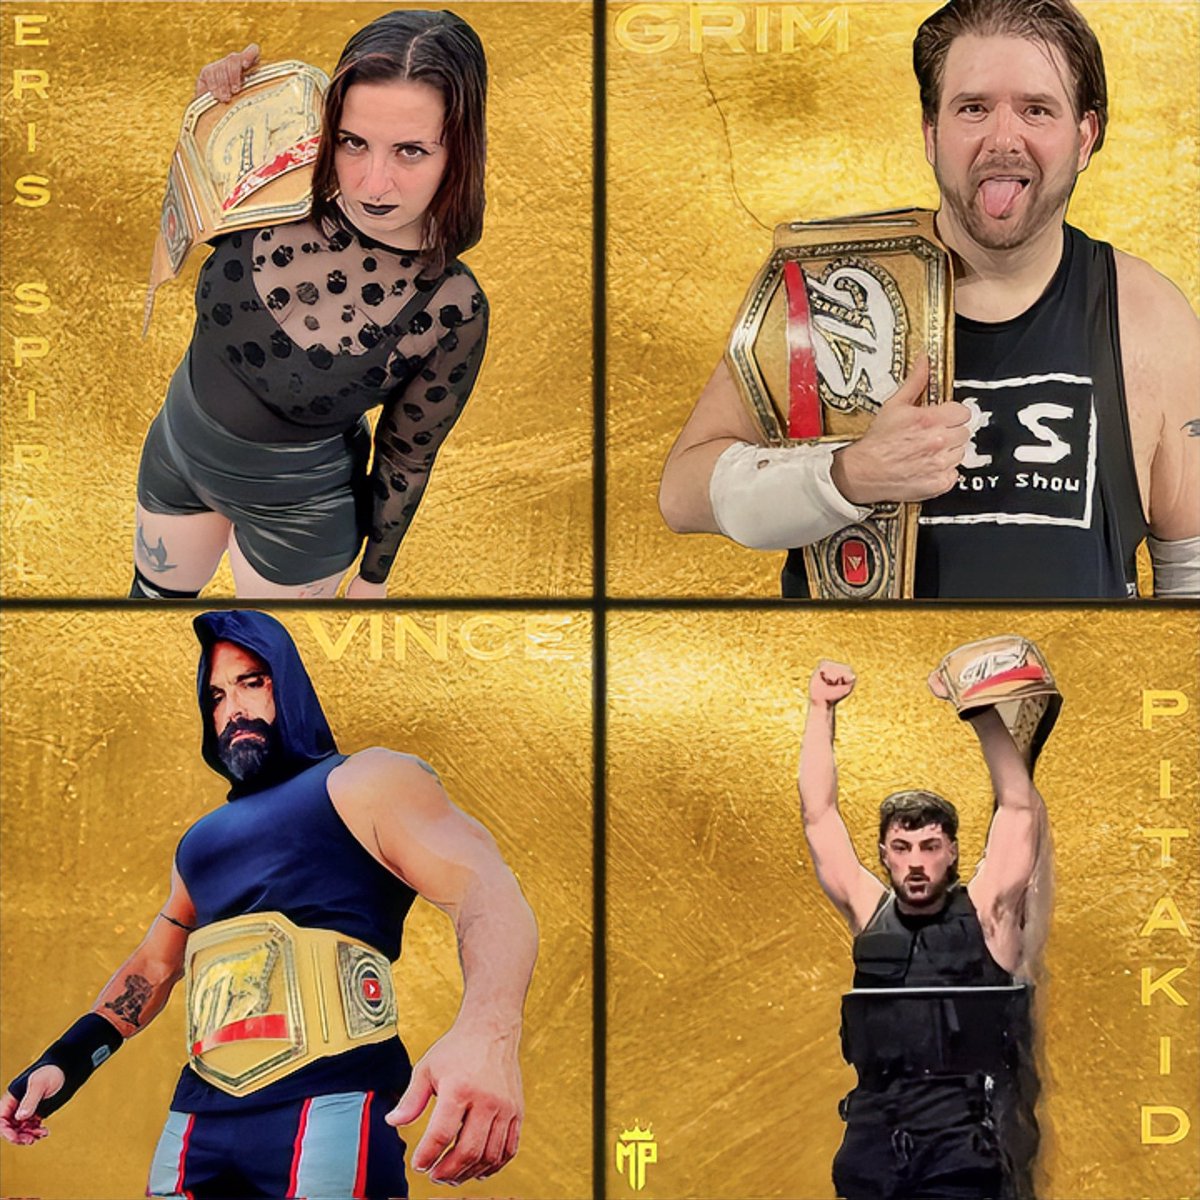 Who’s your pick to win this fatal four way at GRIMAMANIA? Comment below! #gtswrestling